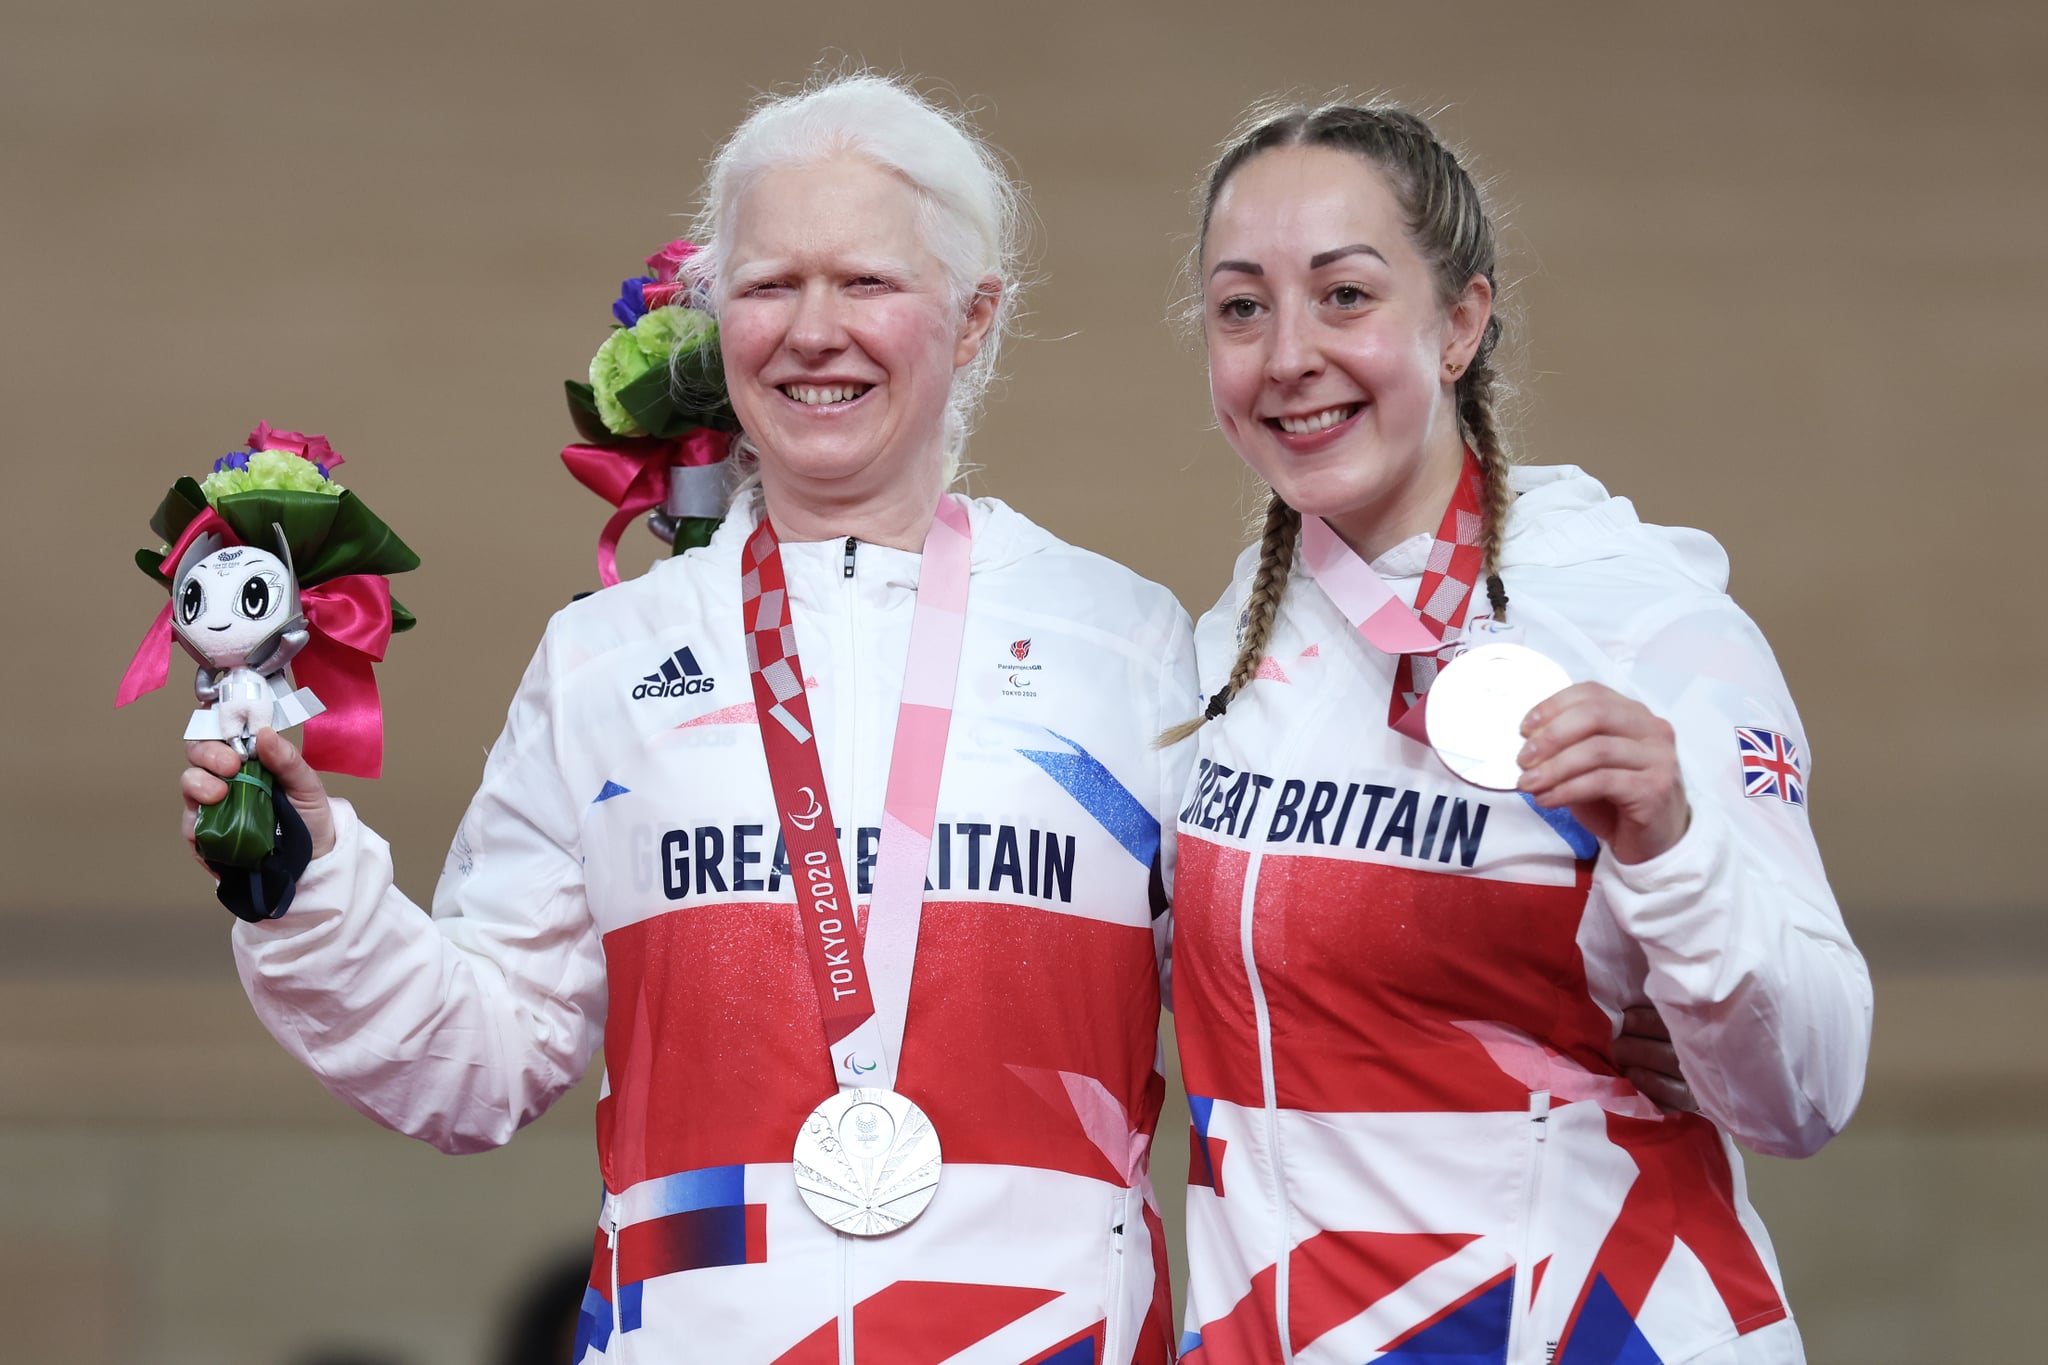 IZU, JAPAN - AUGUST 26: Silver medalists Aileen McGlynn (L) and pilot Helen Scott of Team Great Britain celebrate on the podium during the medal ceremony for the Track Cycling Women's B 1000m Time Trial on day 2 of the Tokyo 2020 Paralympic Games at Izu Velodrome on August 26, 2021 in Izu, Shizuoka, Japan. (Photo by Kiyoshi Ota/Getty Images)